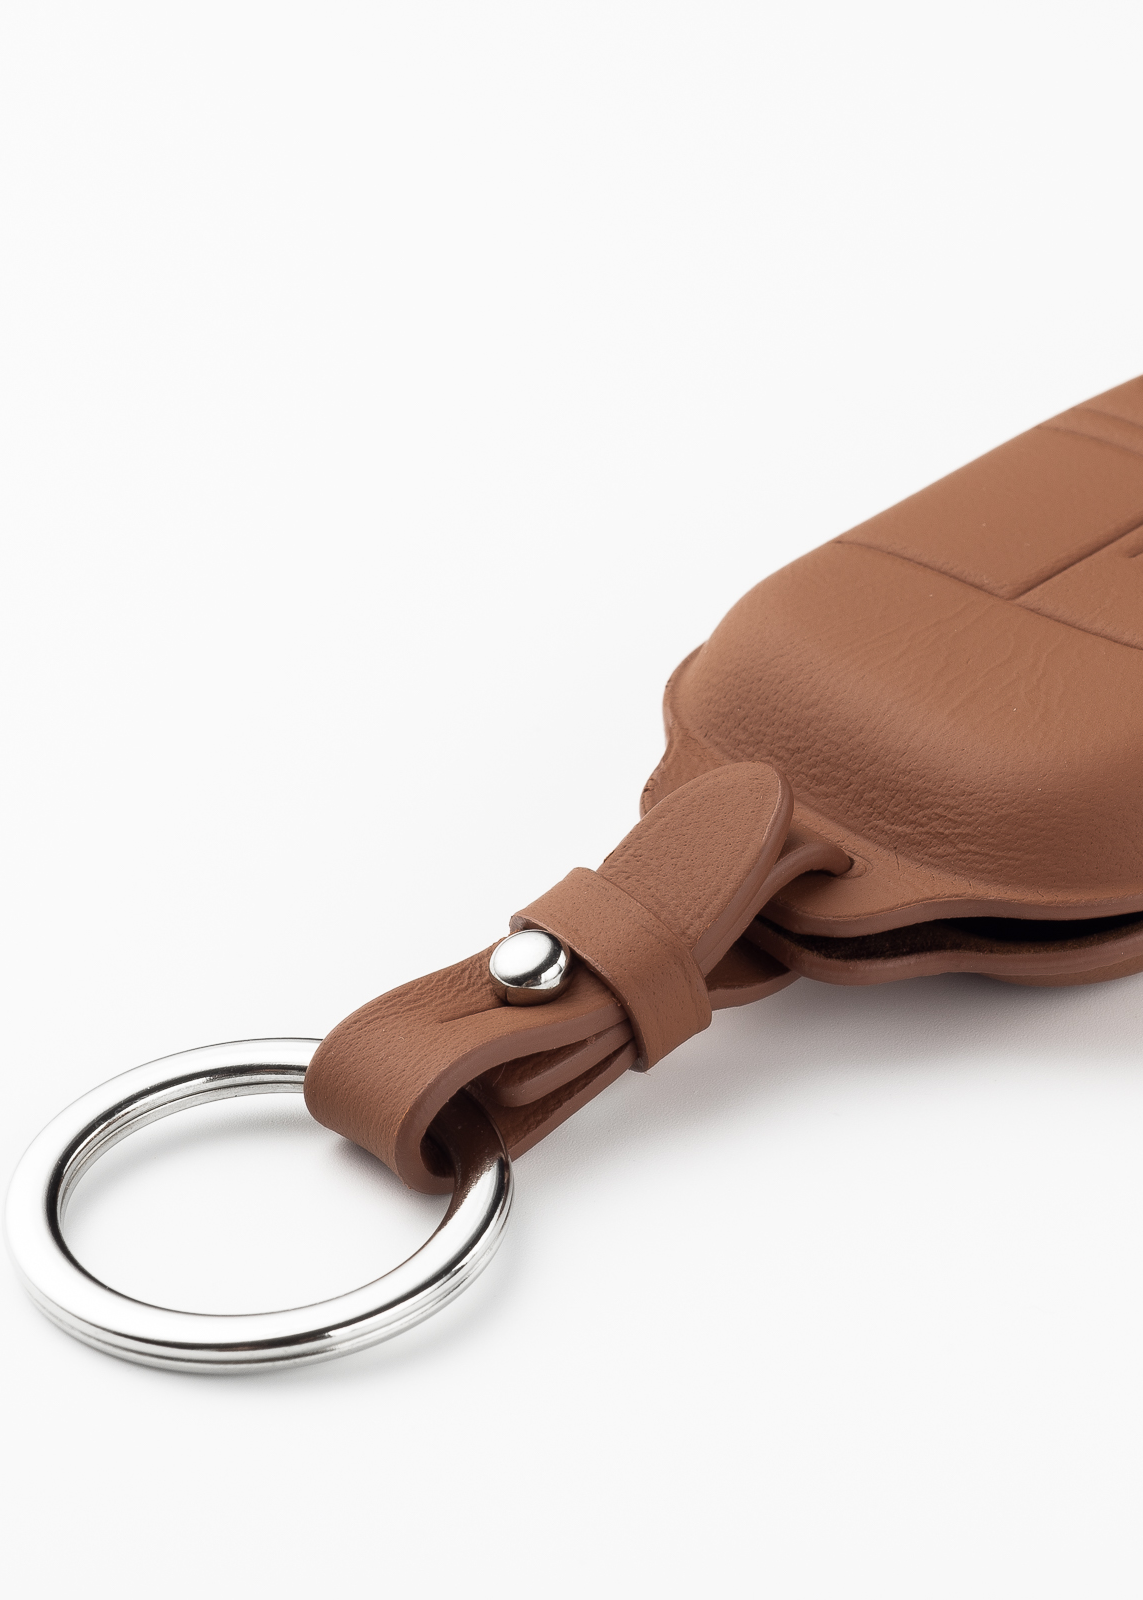 Timotheus for Jeep key fob cover case, Compatible with Jeep key case, Handmade Genuine Leather for Jeep keychains | JP44